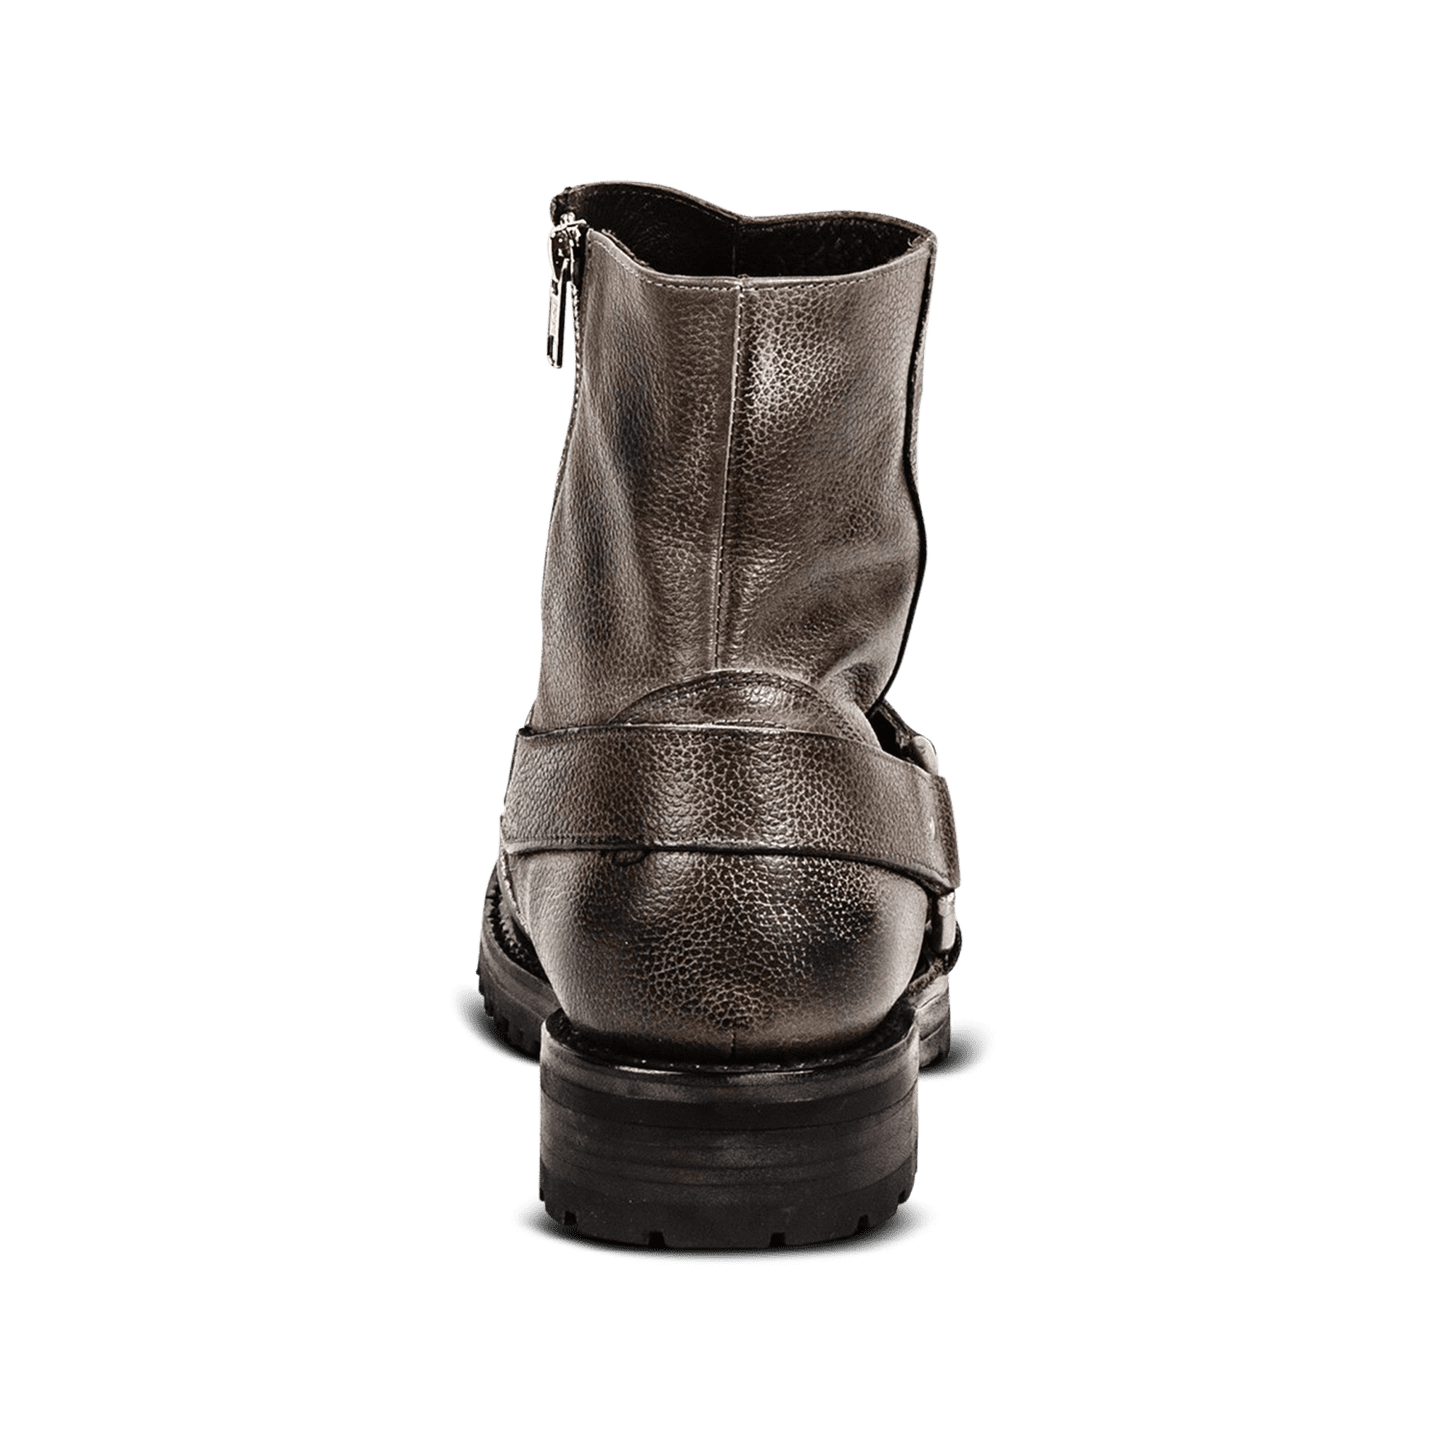 Back view showing leather strap and silver hardware on FREEBIRD men's Ozzie stone boot